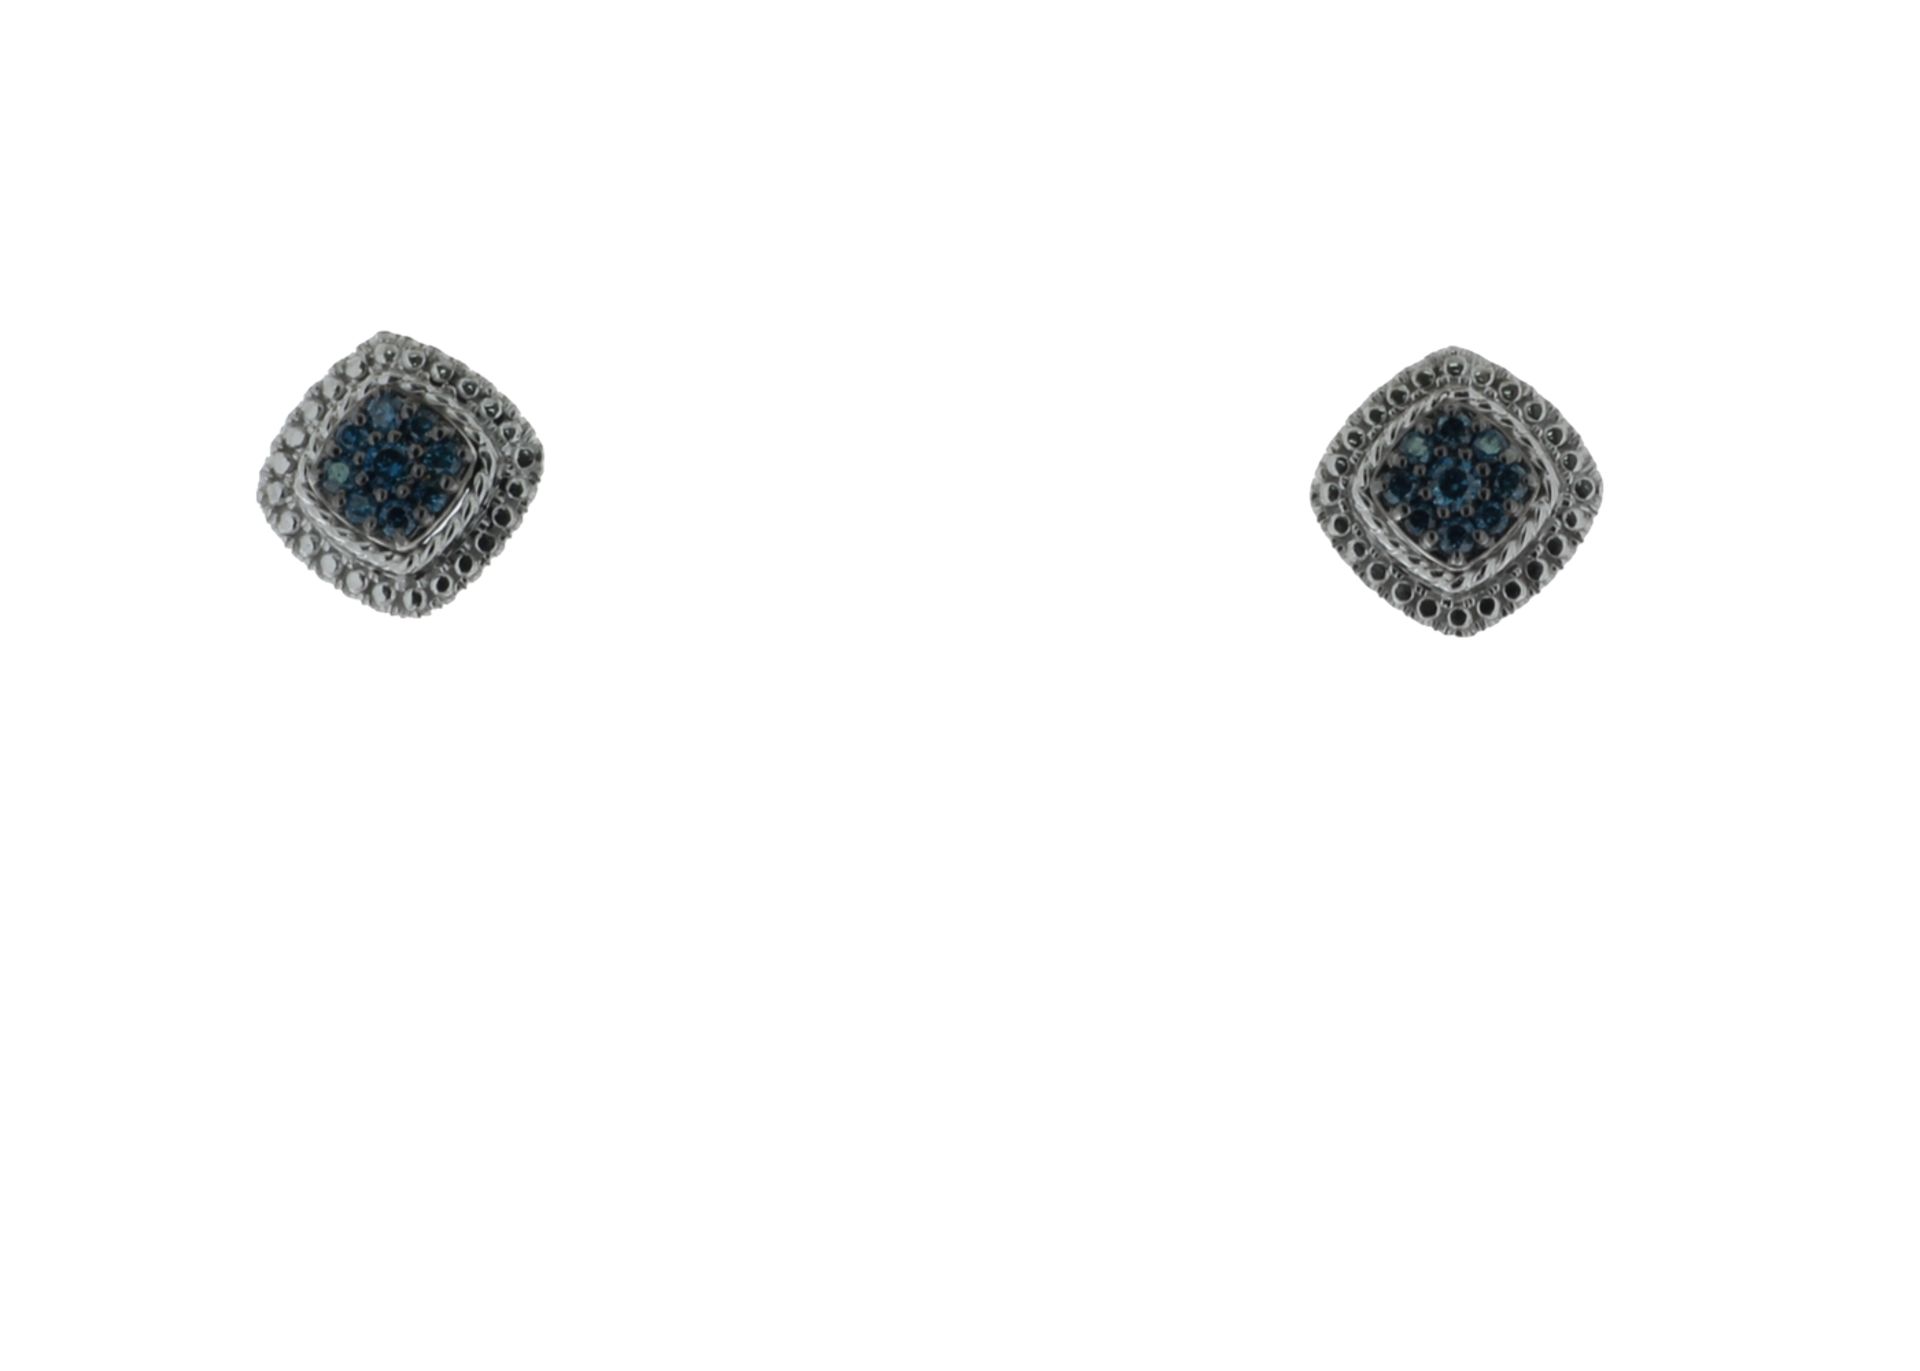 9ct White Gold Earring 0.23 Carats - Valued by GIE - Vibrant 9ct white gold cluster stud earrings